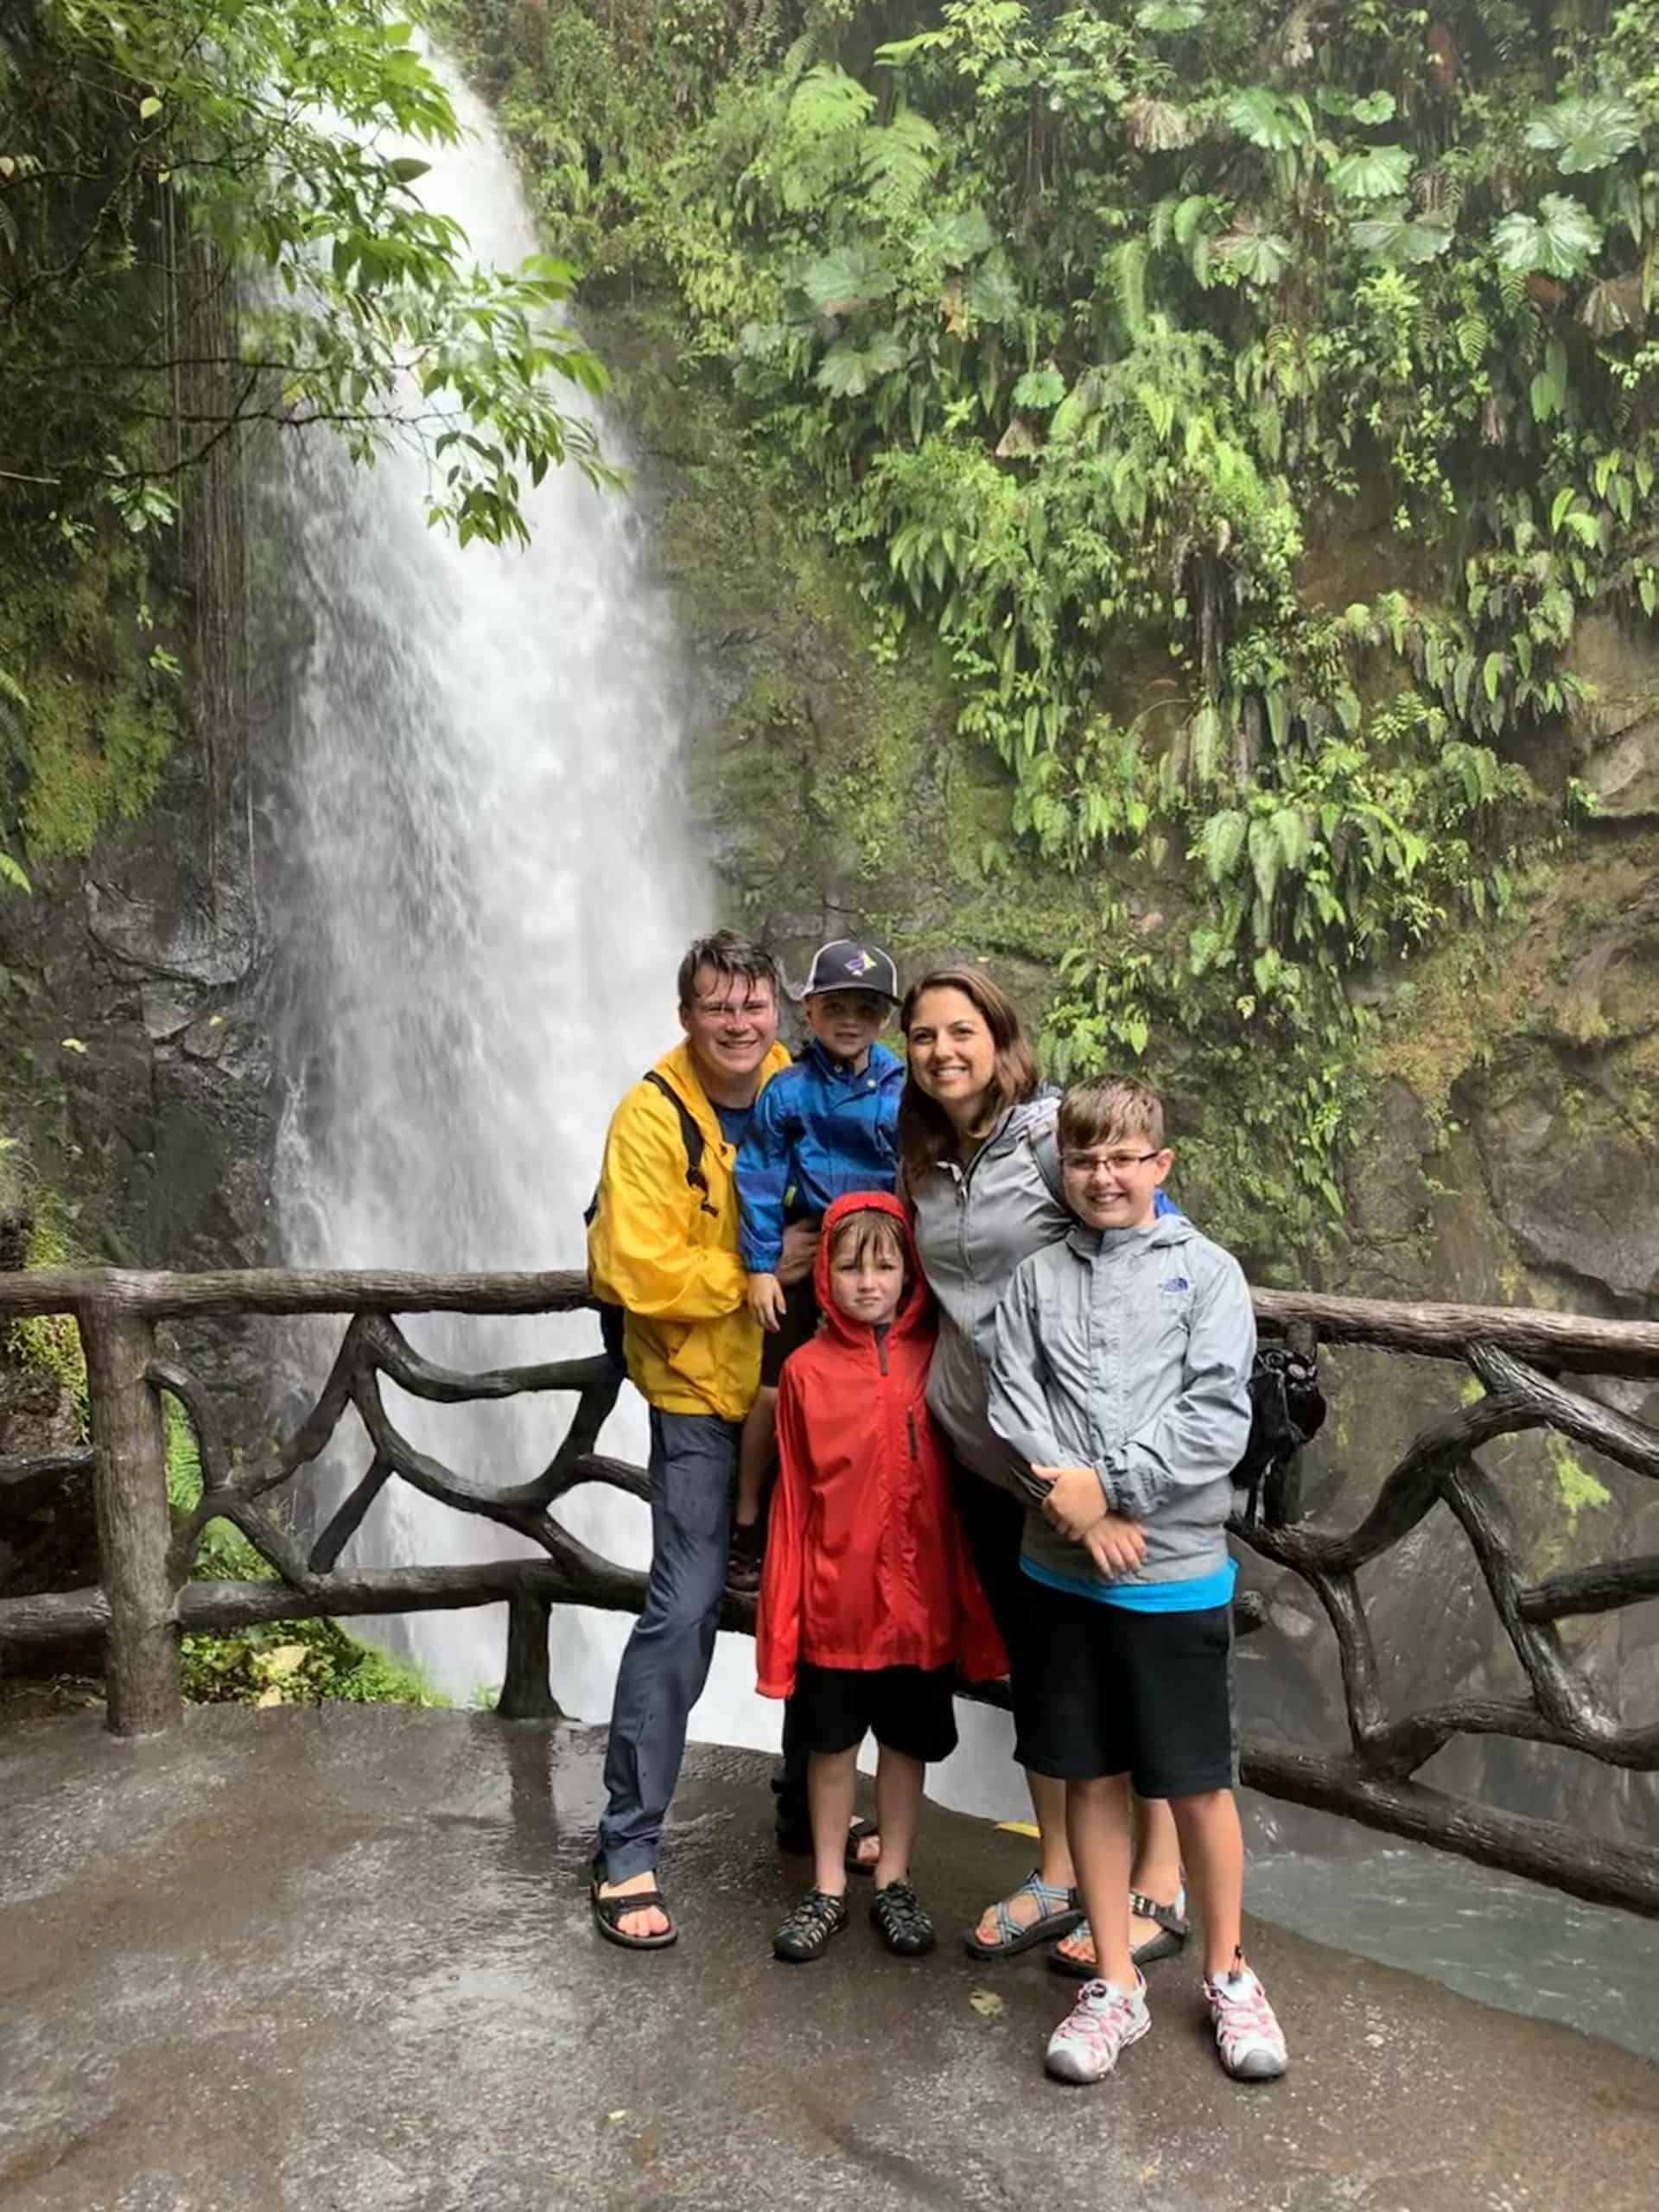 Family posing in front of waterfall at La Paz Waterfall Garden in Costa Rica